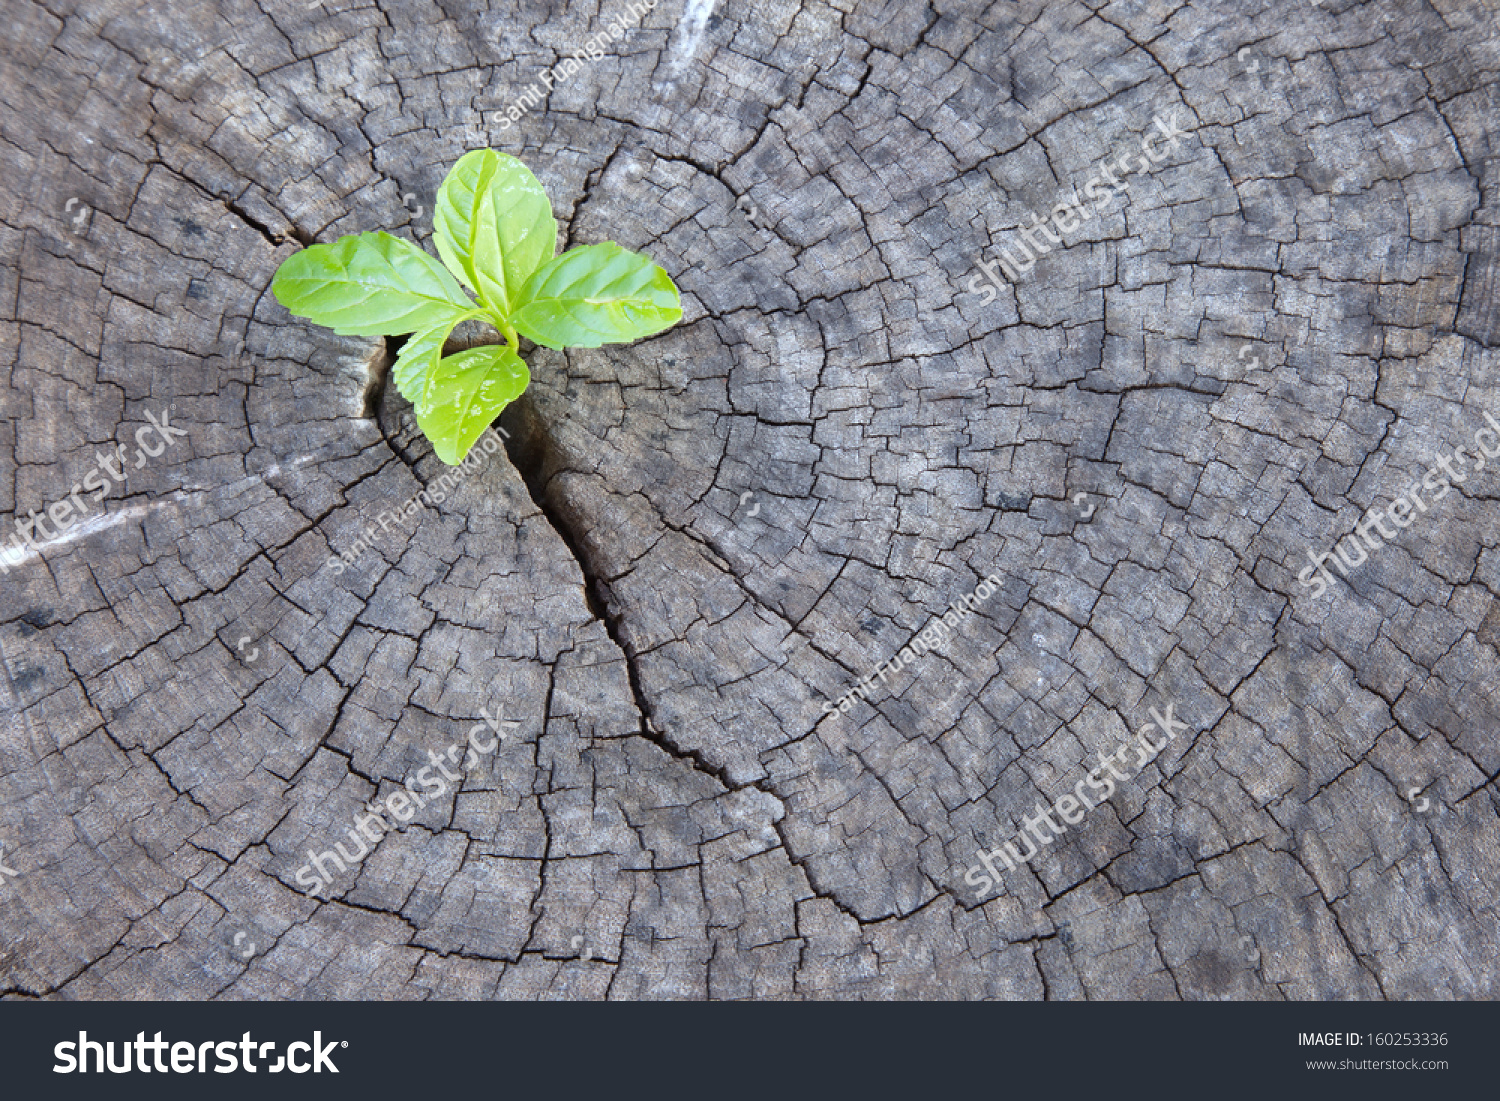 New development and renewal as a business concept of emerging leadership success as an old cut down tree and a strong seedling growing in the center trunk as a concept of support building a future.  #160253336